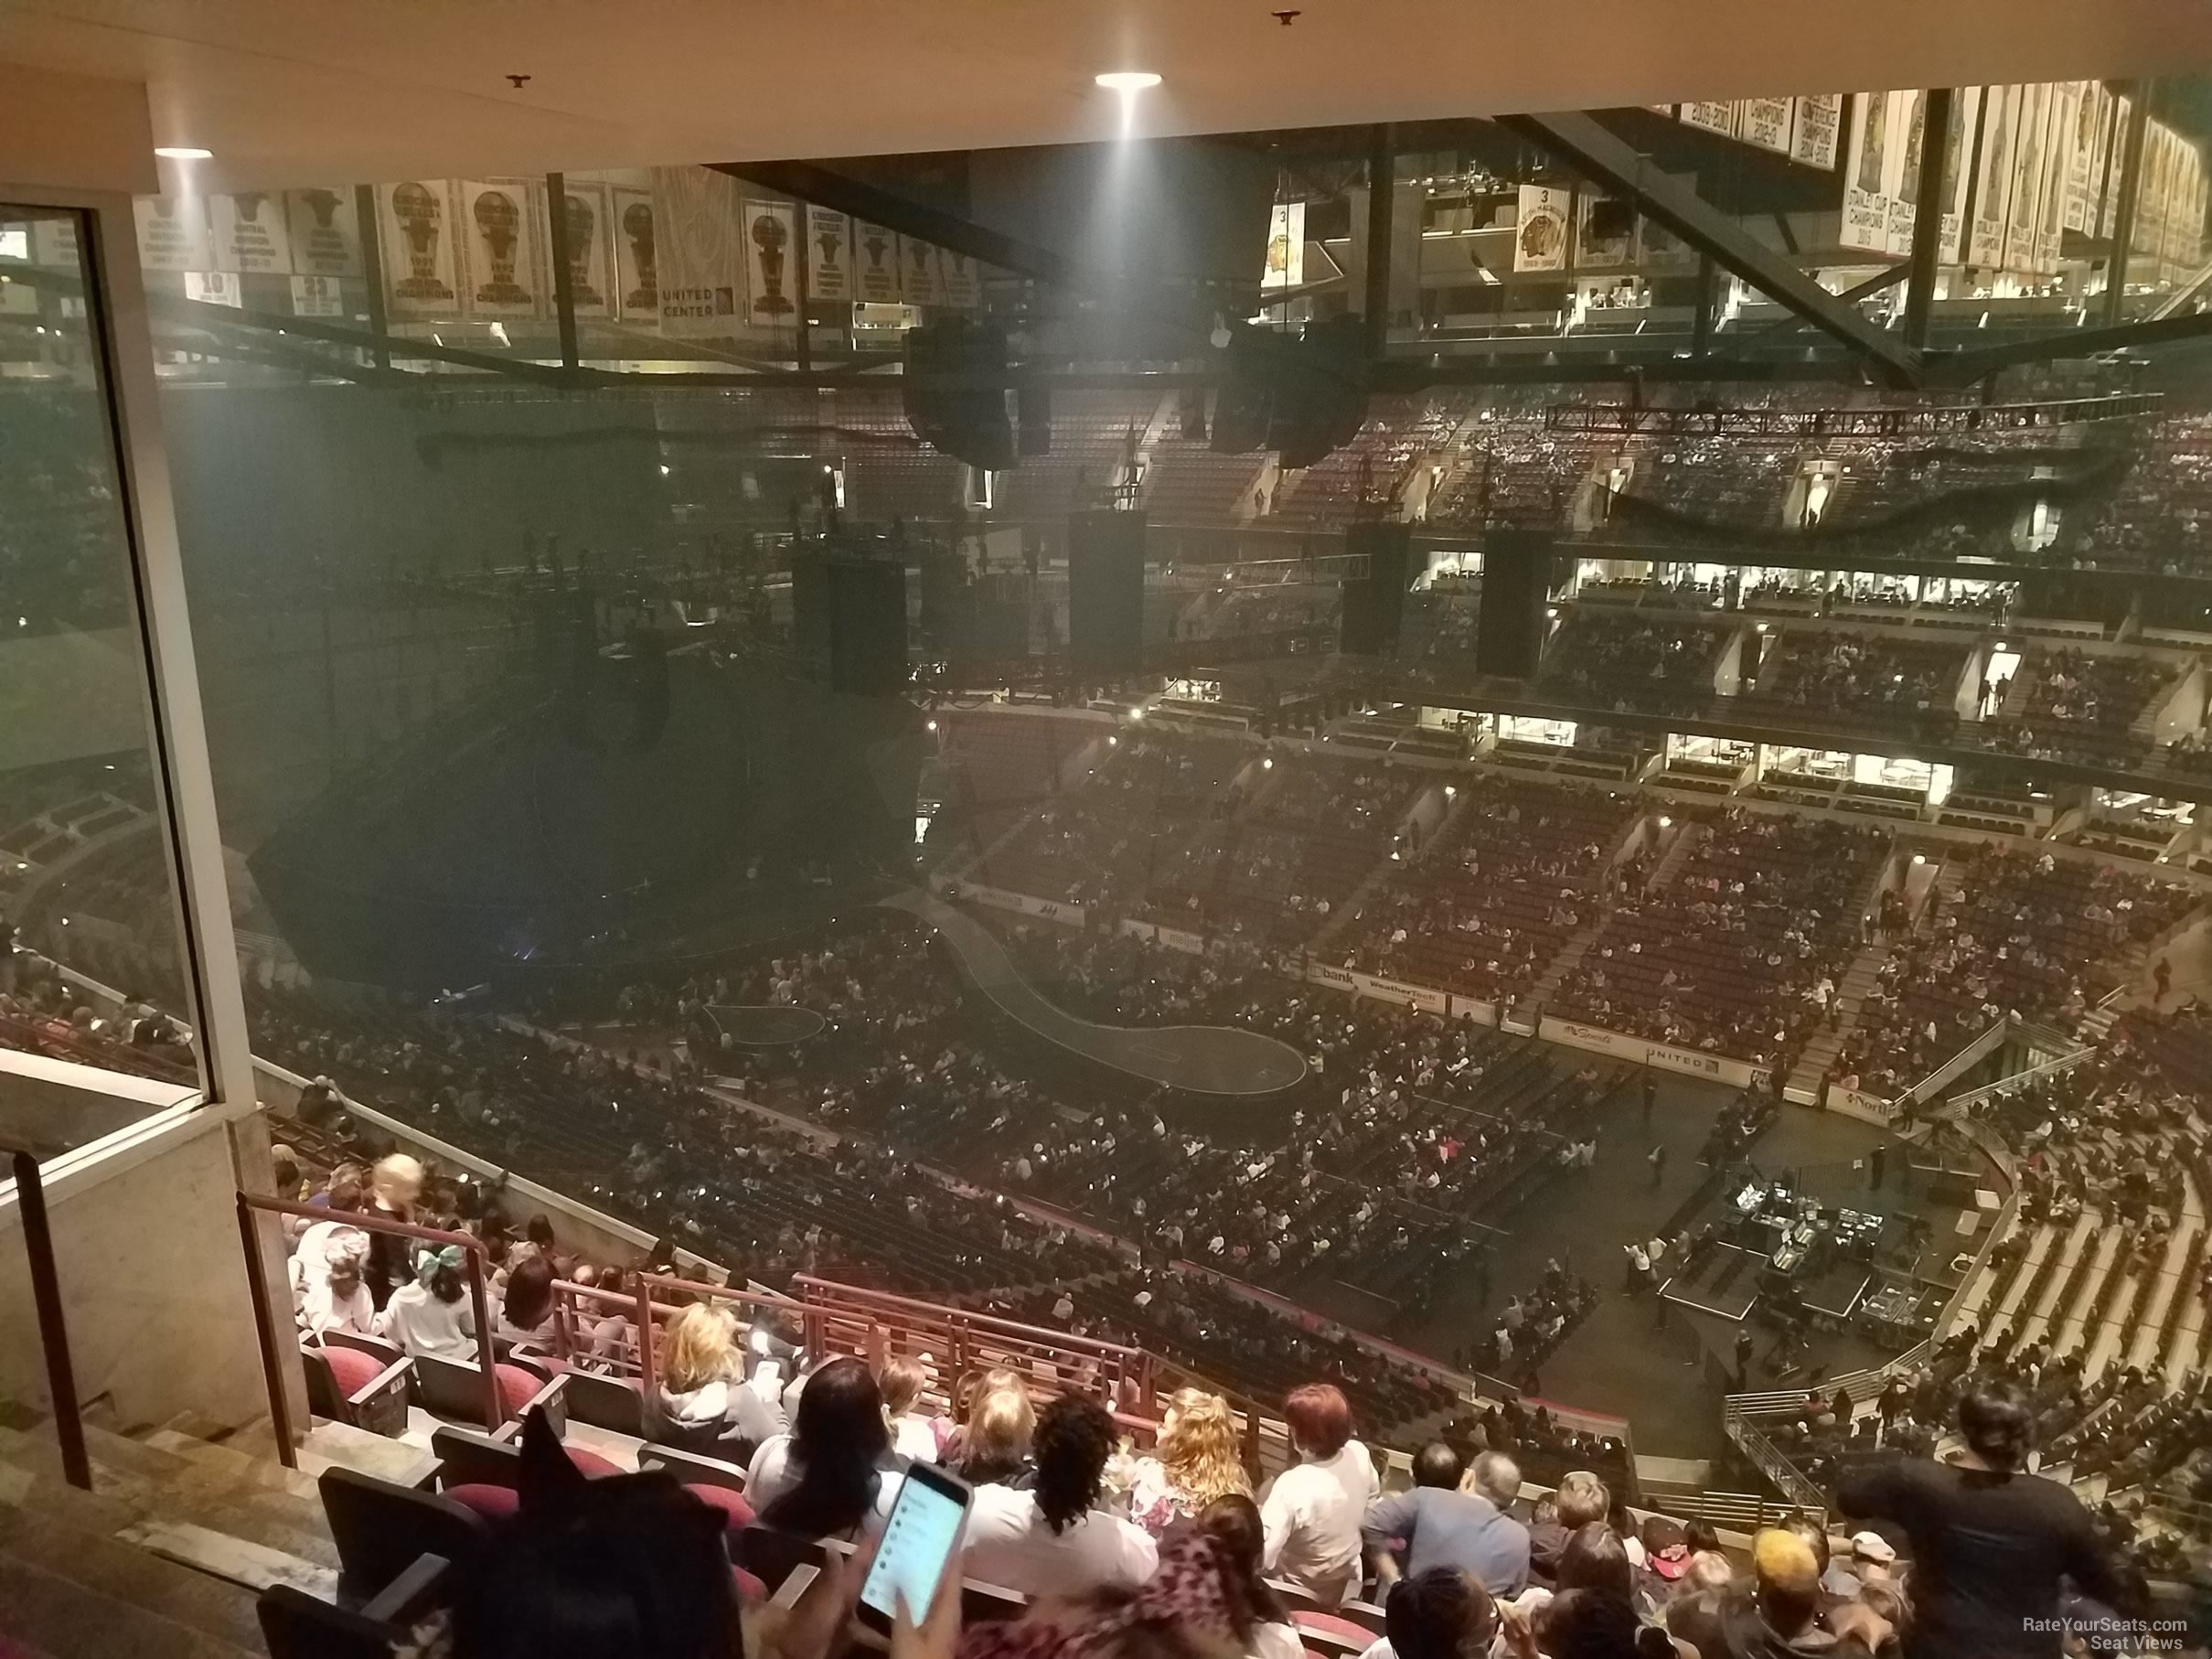 section 314, row 17 seat view  for concert - united center